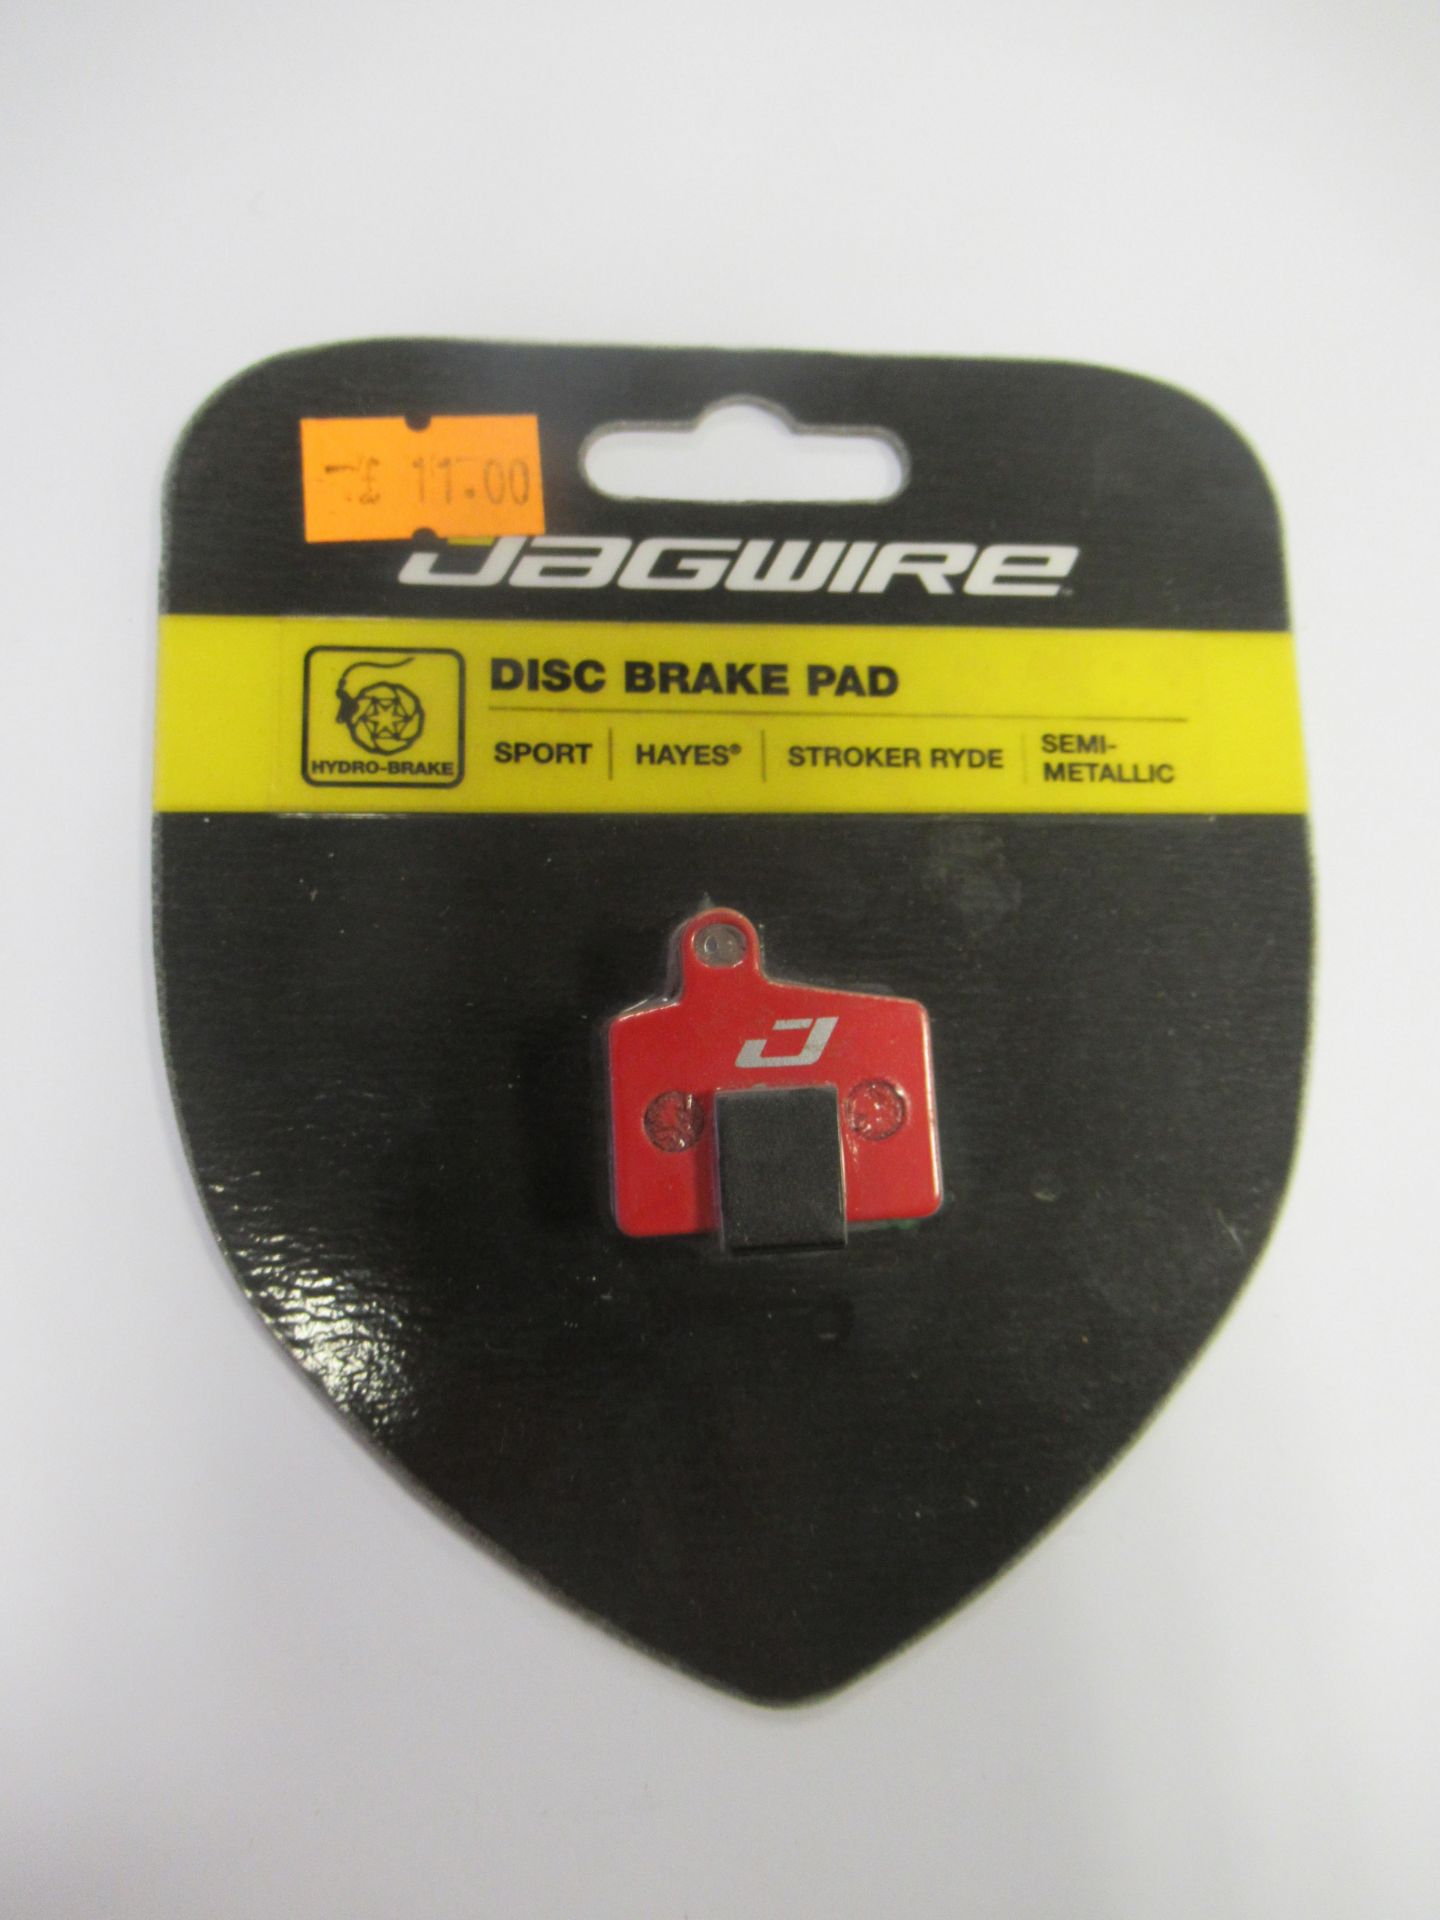 Jagwire Disc Brake Pads to include 4x Sport, Hayes, Stroker Ryde, Semi-Metallic (DCA076), RRP £11 ea - Image 5 of 6